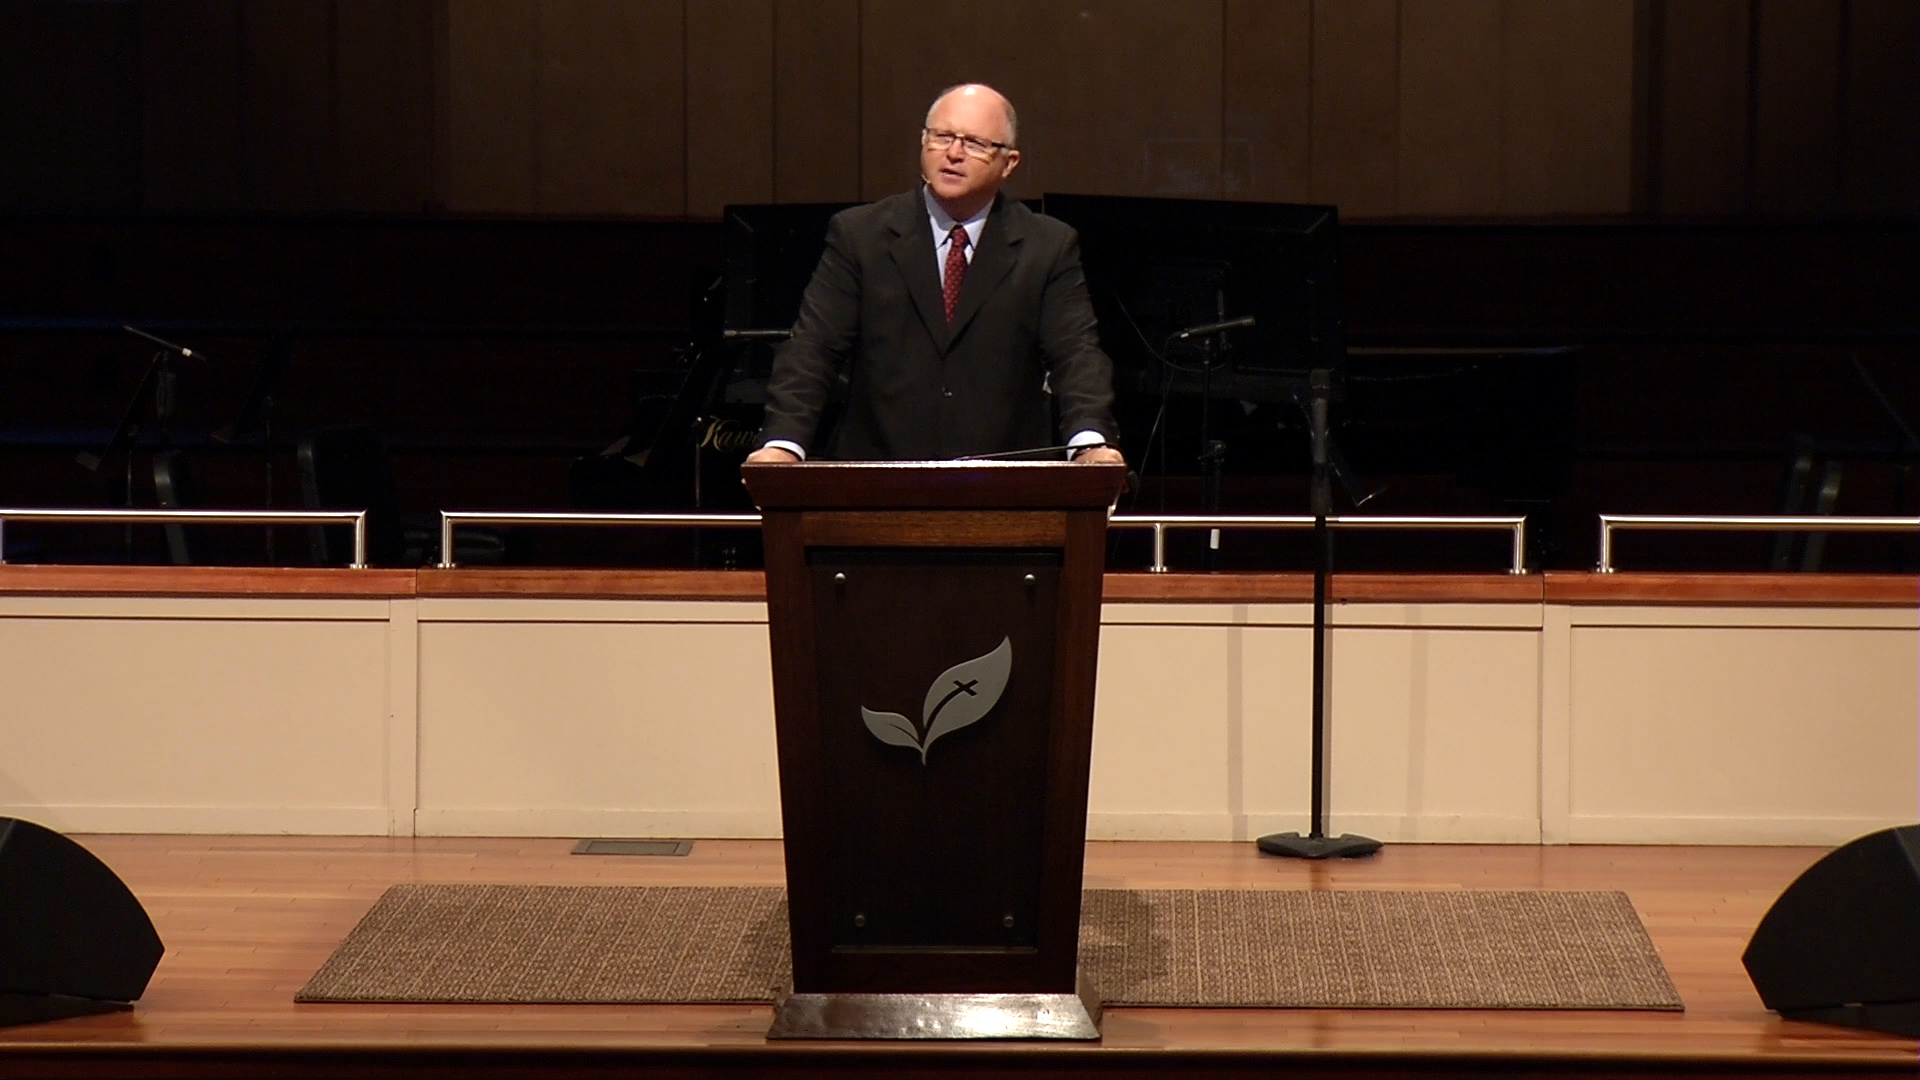 Pastor Paul Chappell: Grace to Stand Like Daniel